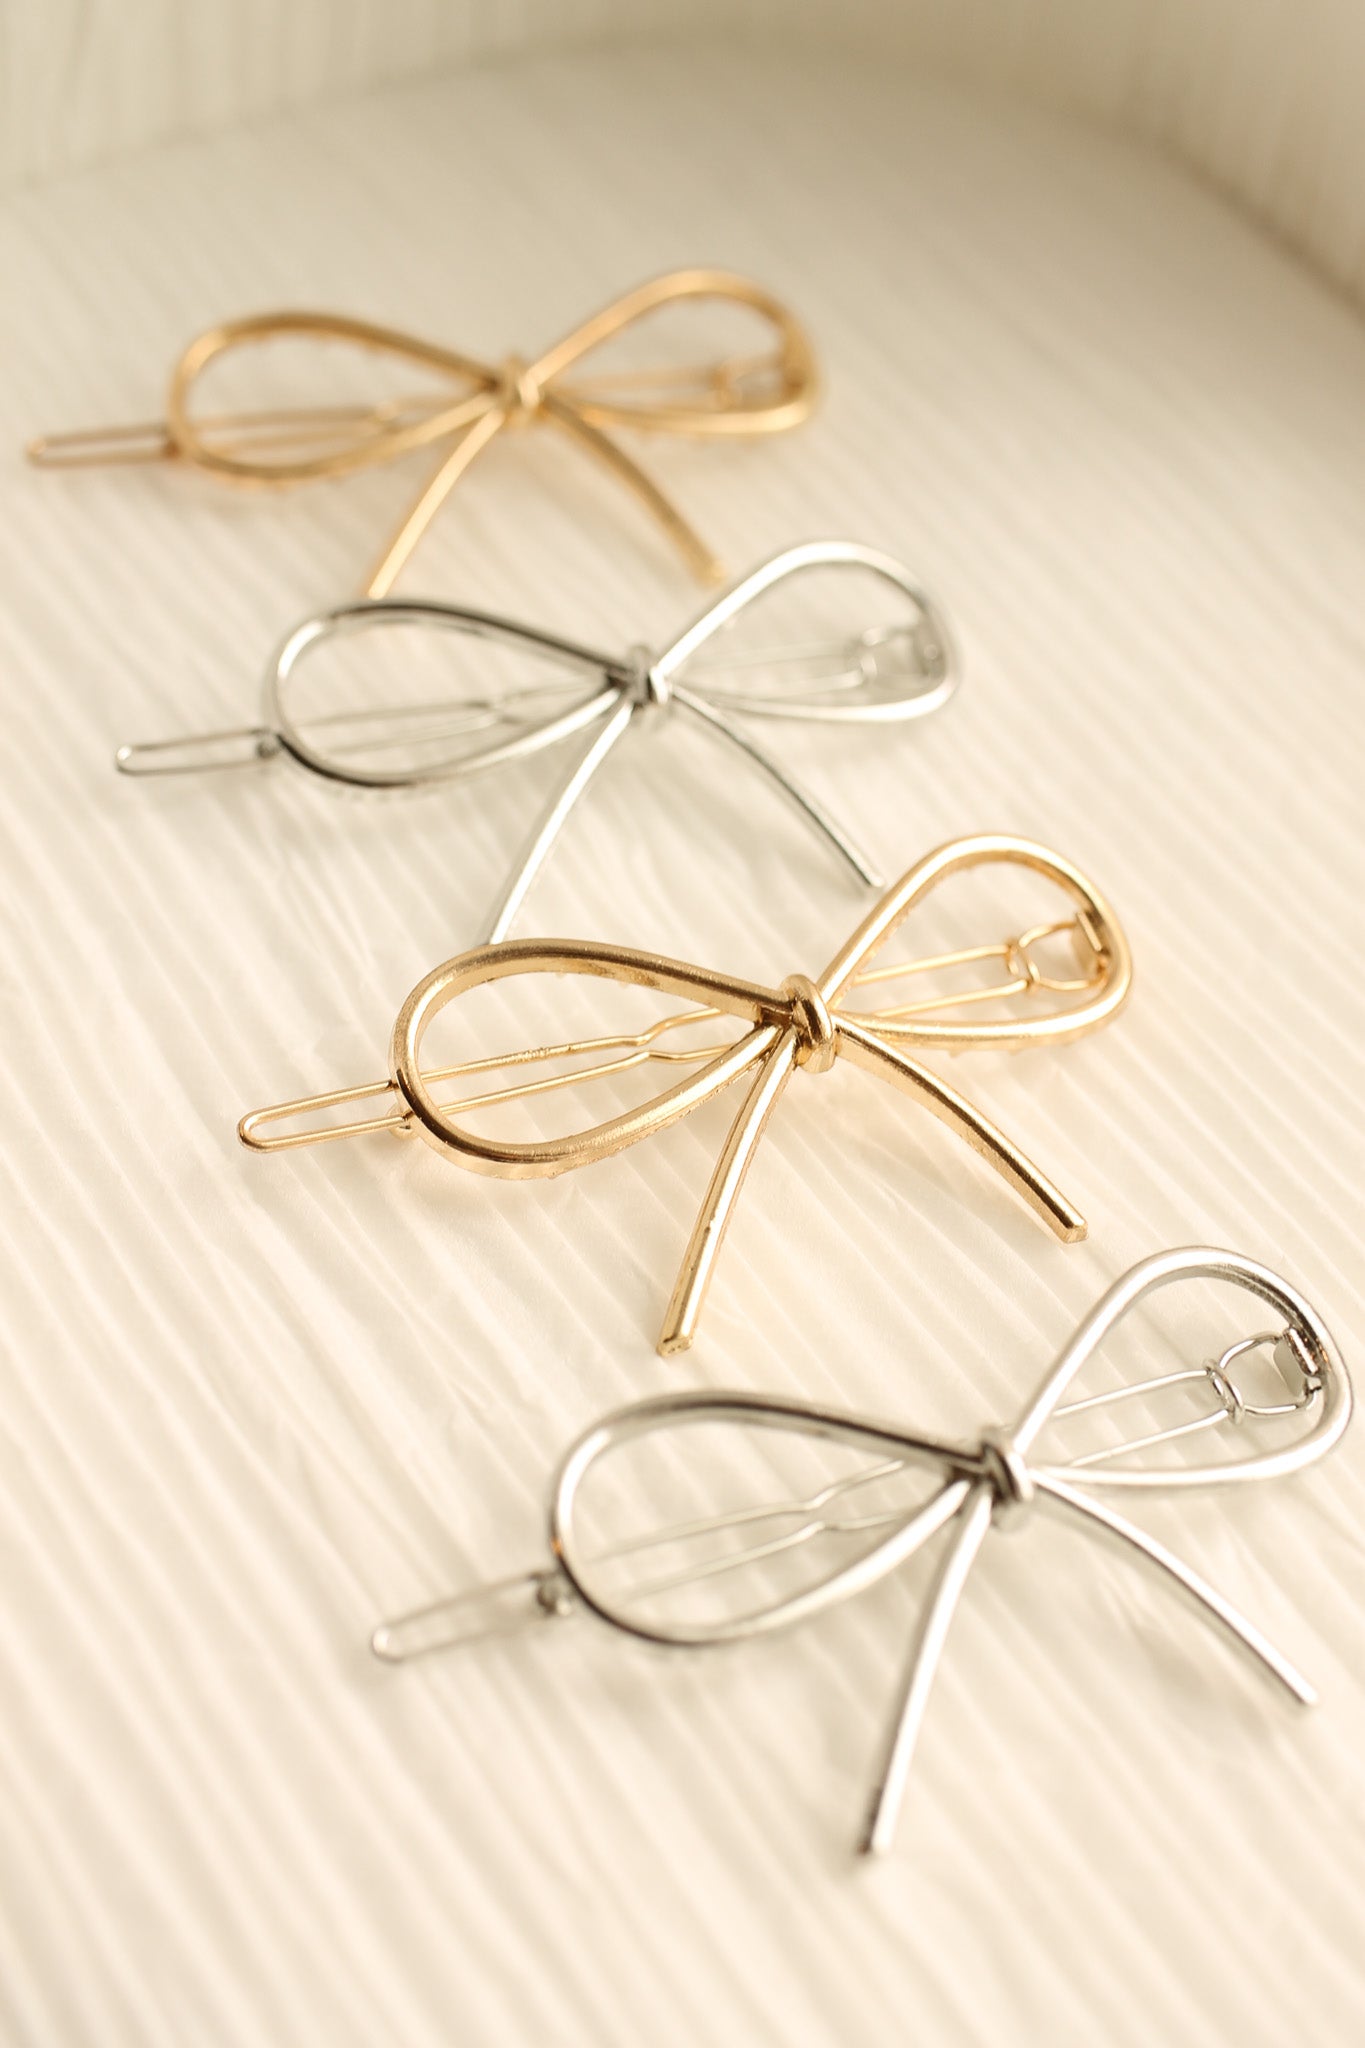 The Bow Barrette in Gold